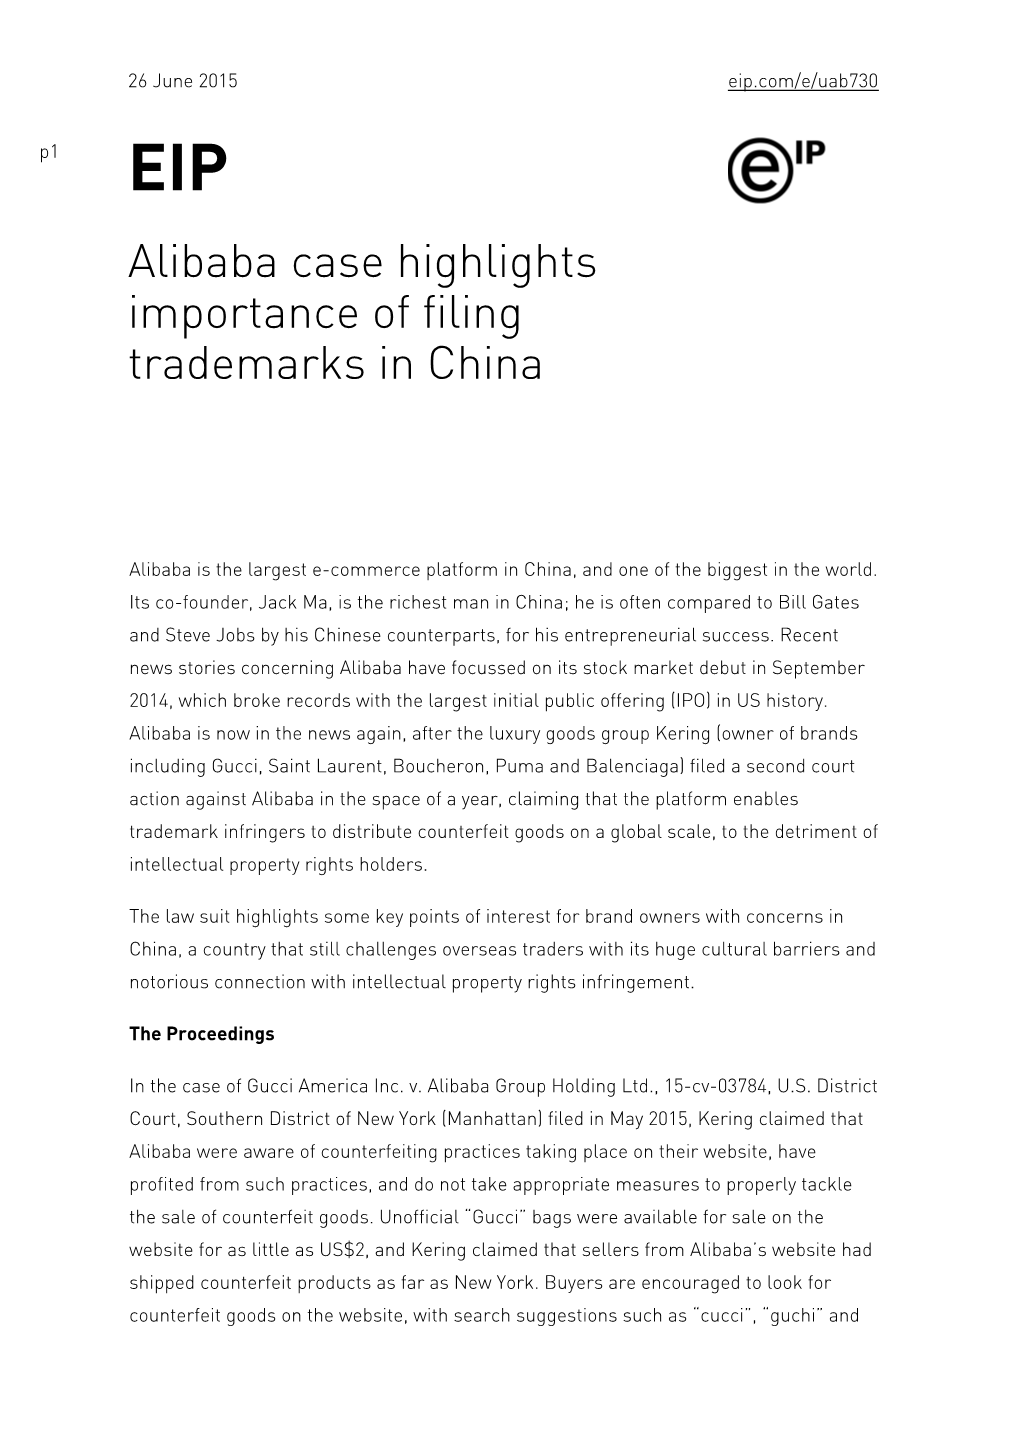 Alibaba Case Highlights Importance of Filing Trademarks in China